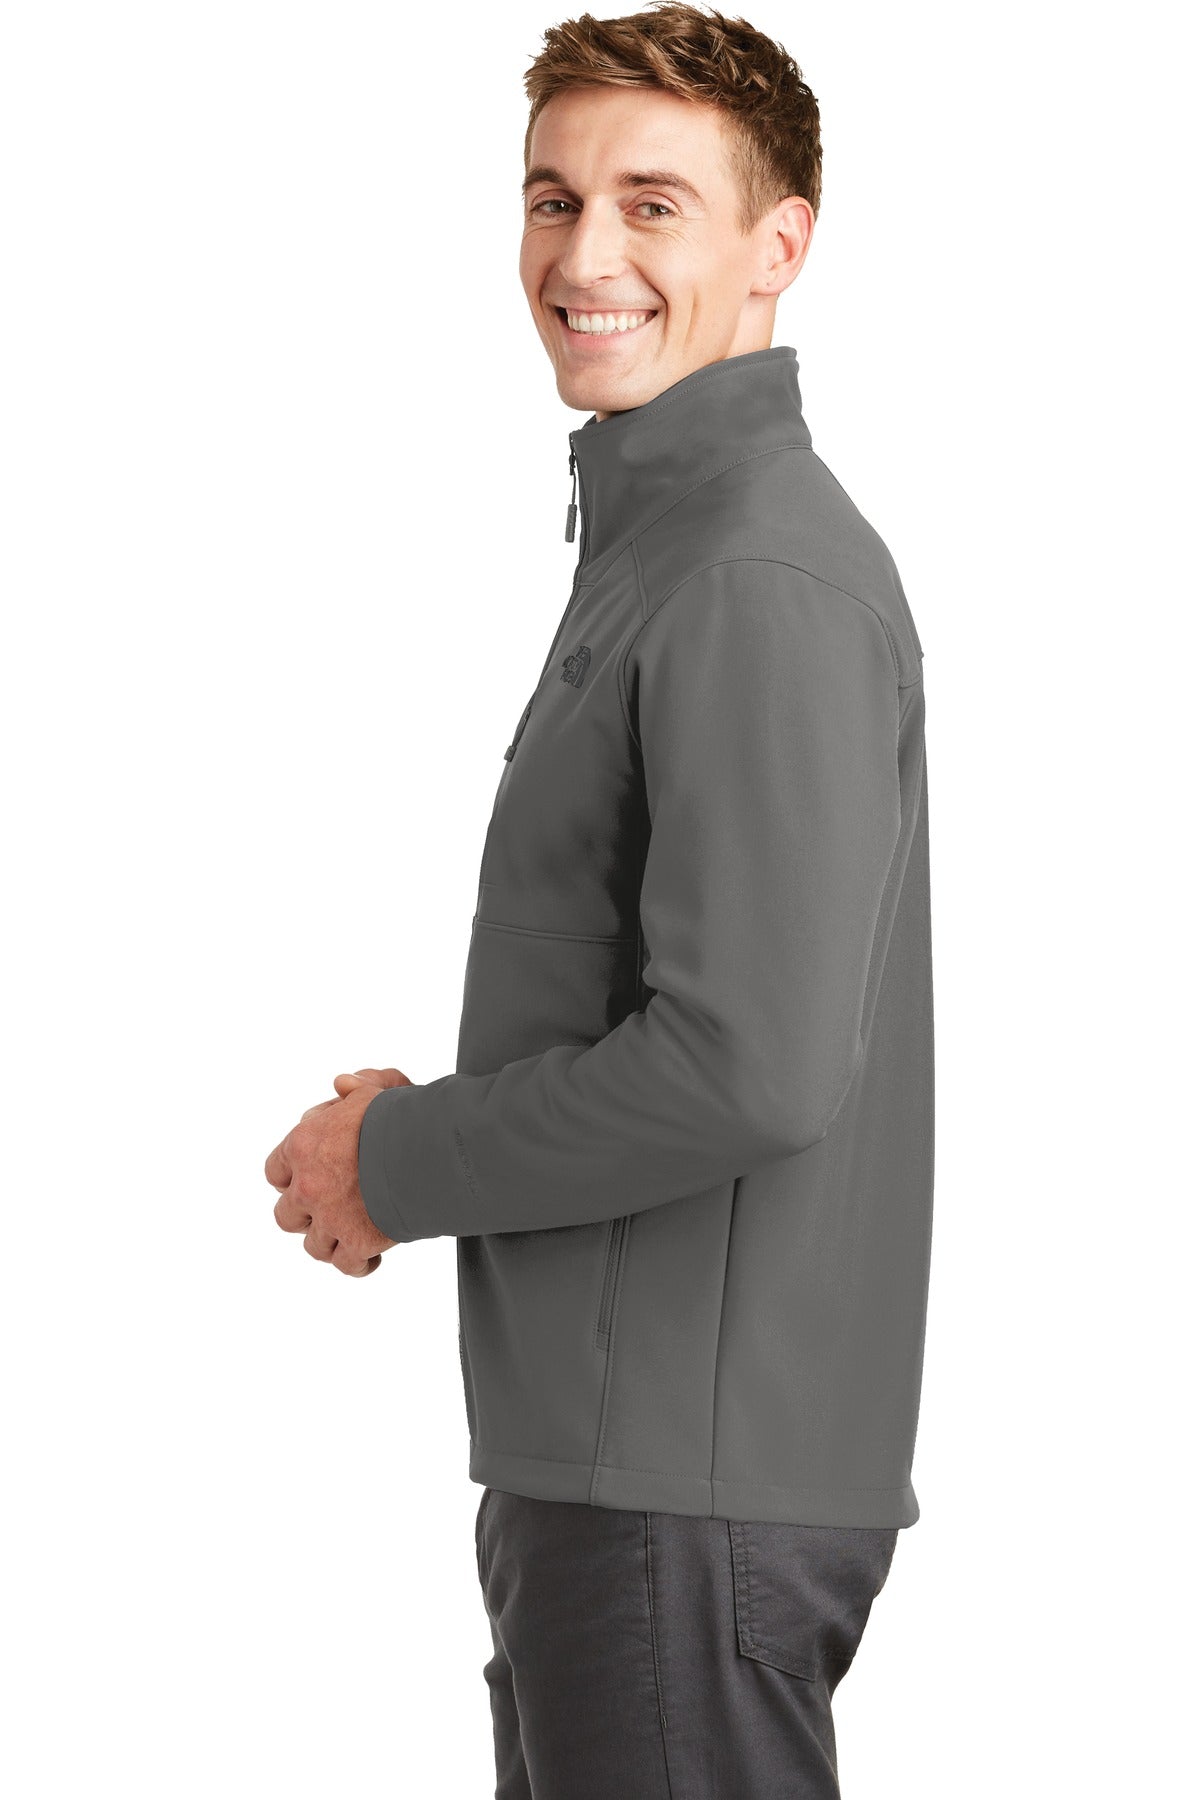 The North Face ® Apex Barrier Soft Shell Jacket. NF0A3LGT - DFW Impression